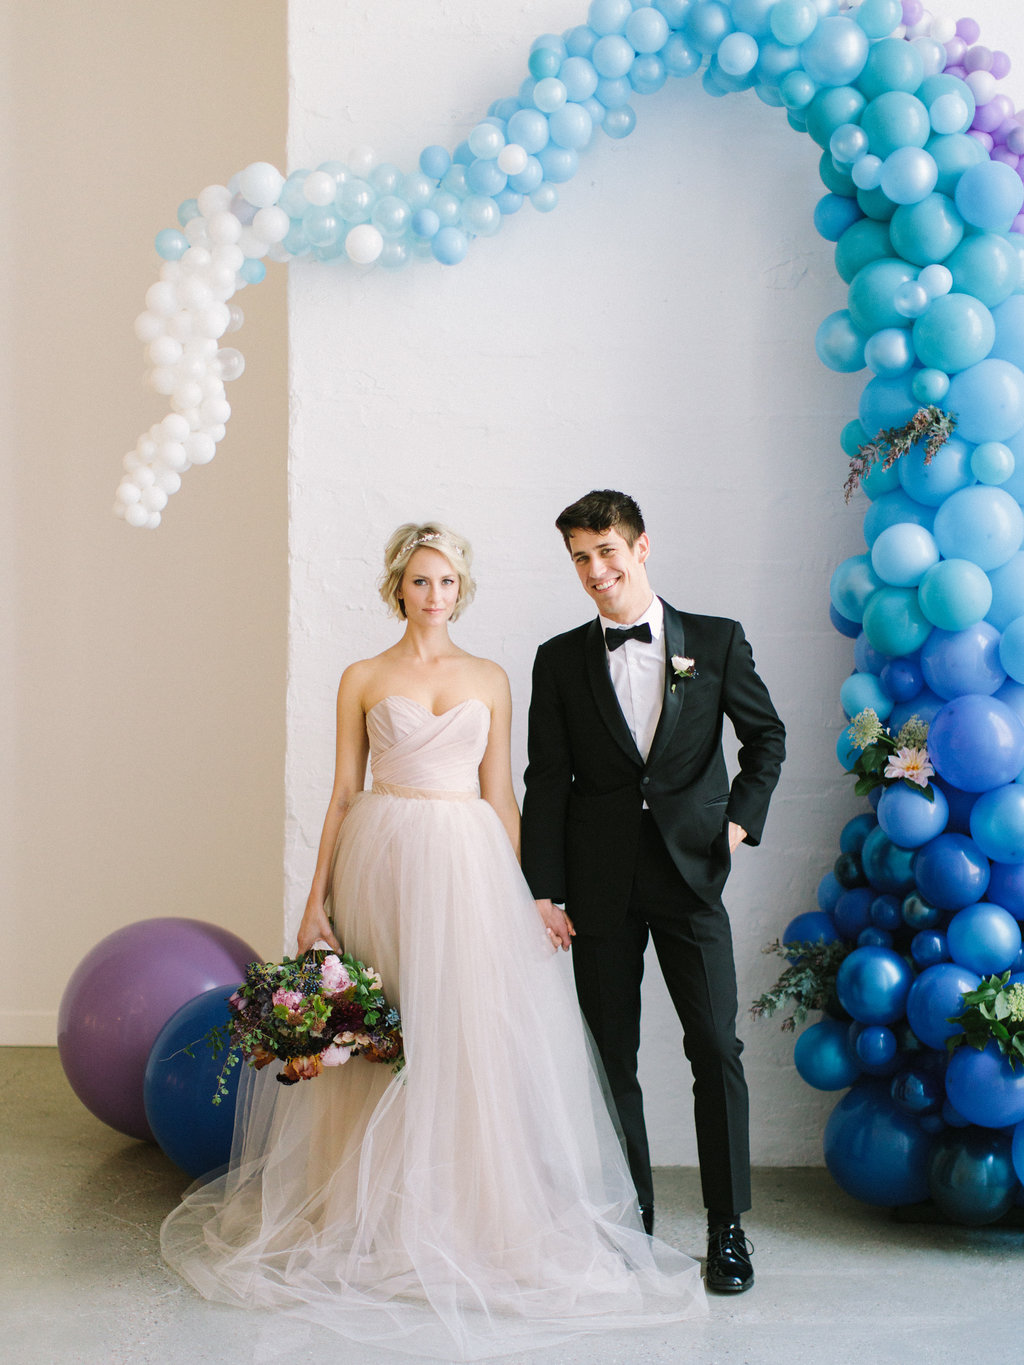 Bride and groom with playful blue ceremony background and champagne dress with gardeny bouquet of pink dahlia and peonies, irises, plum scabiosa, hydrangea, berries, tweedia, and lilac.